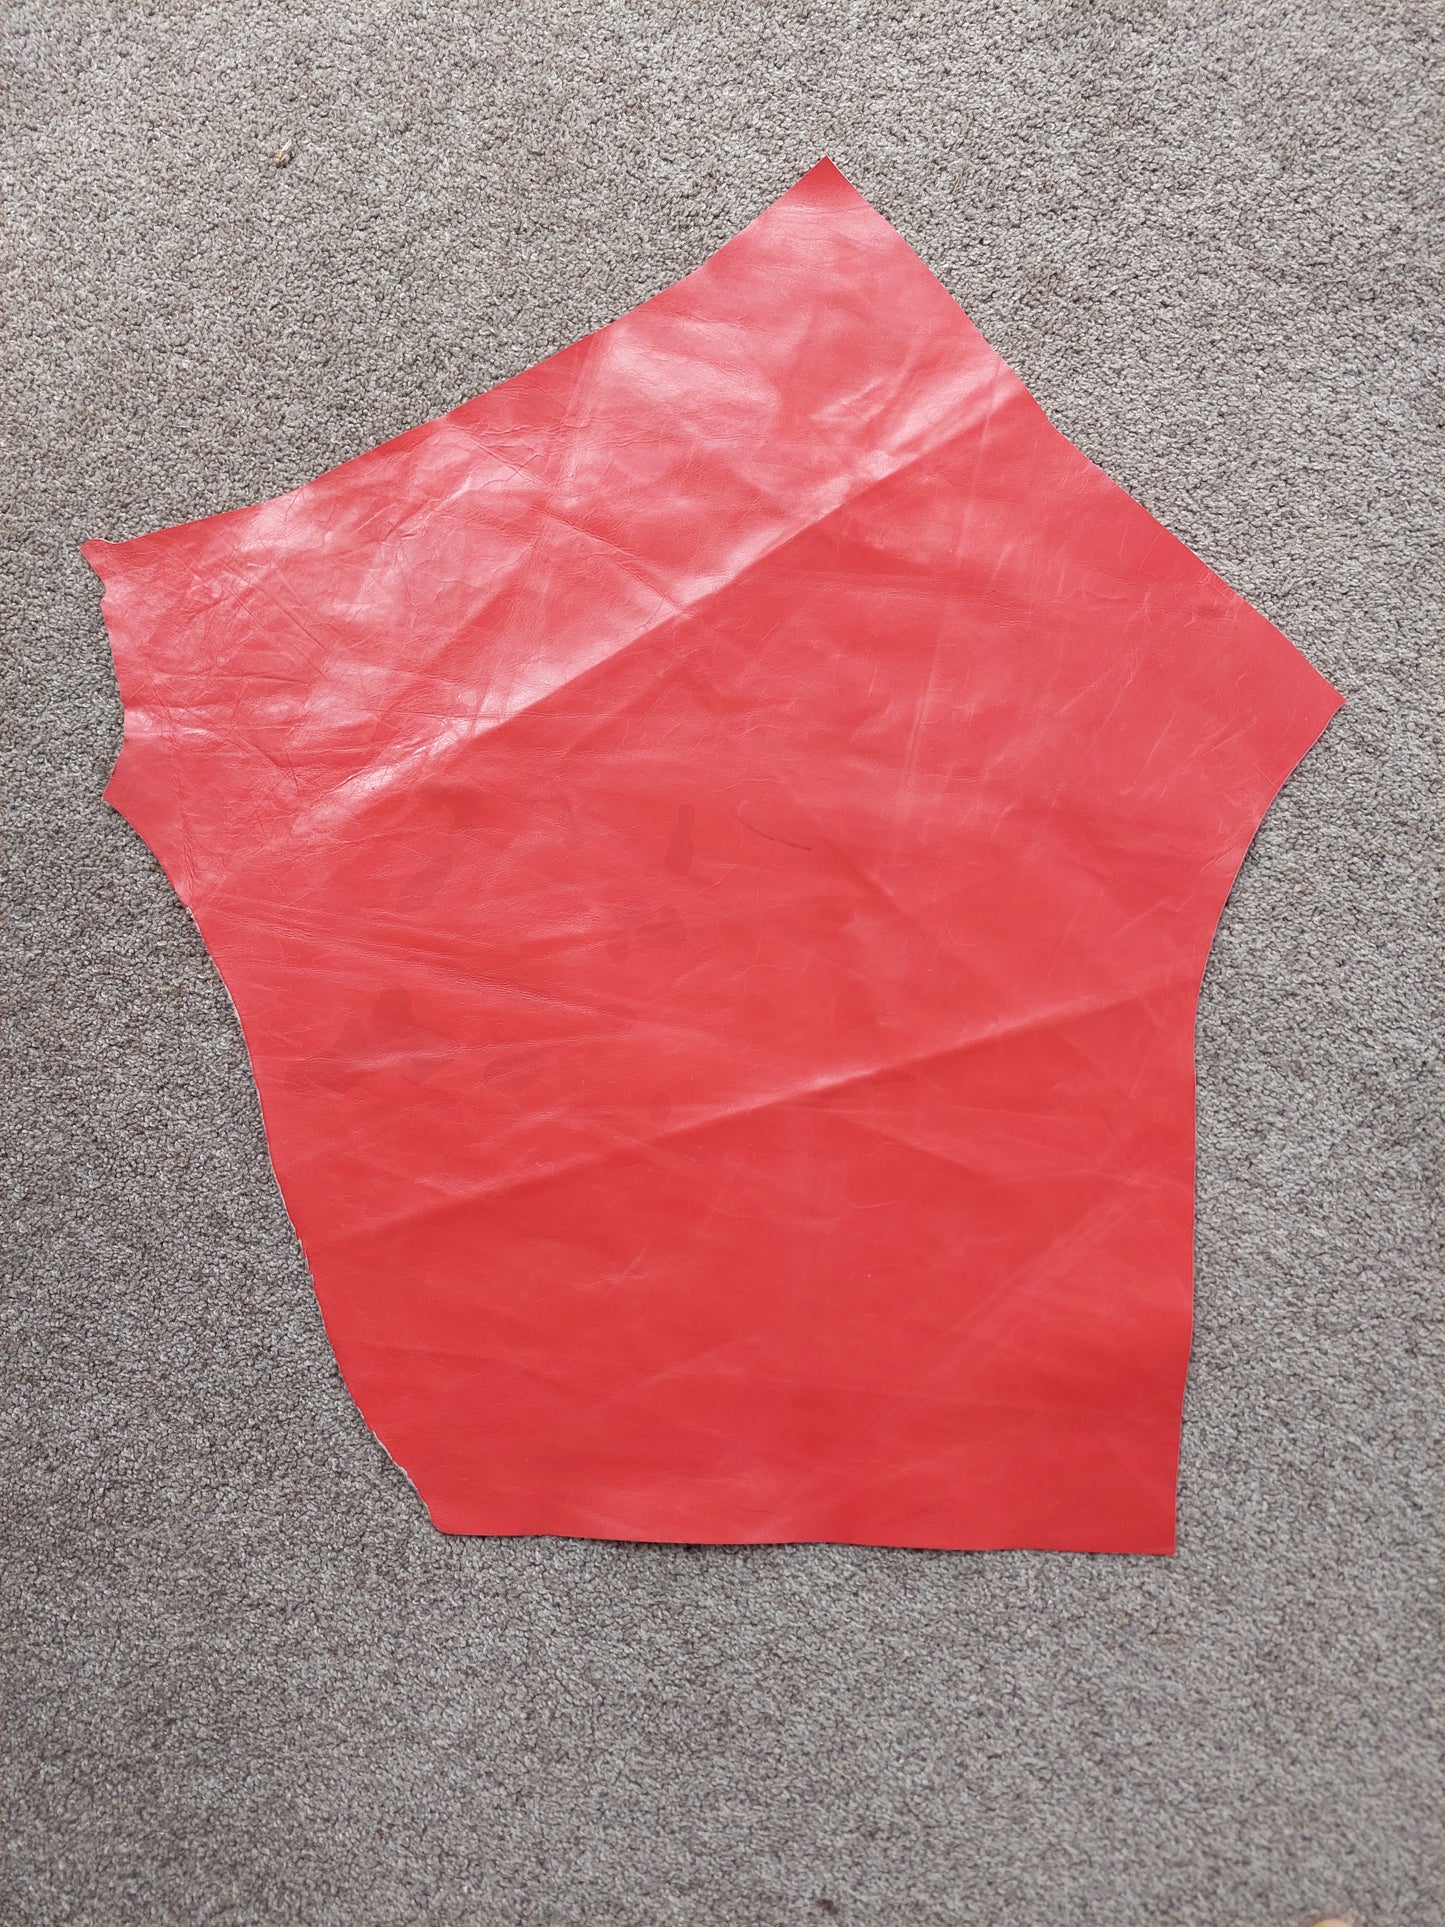 Red Scrap Leather Piece